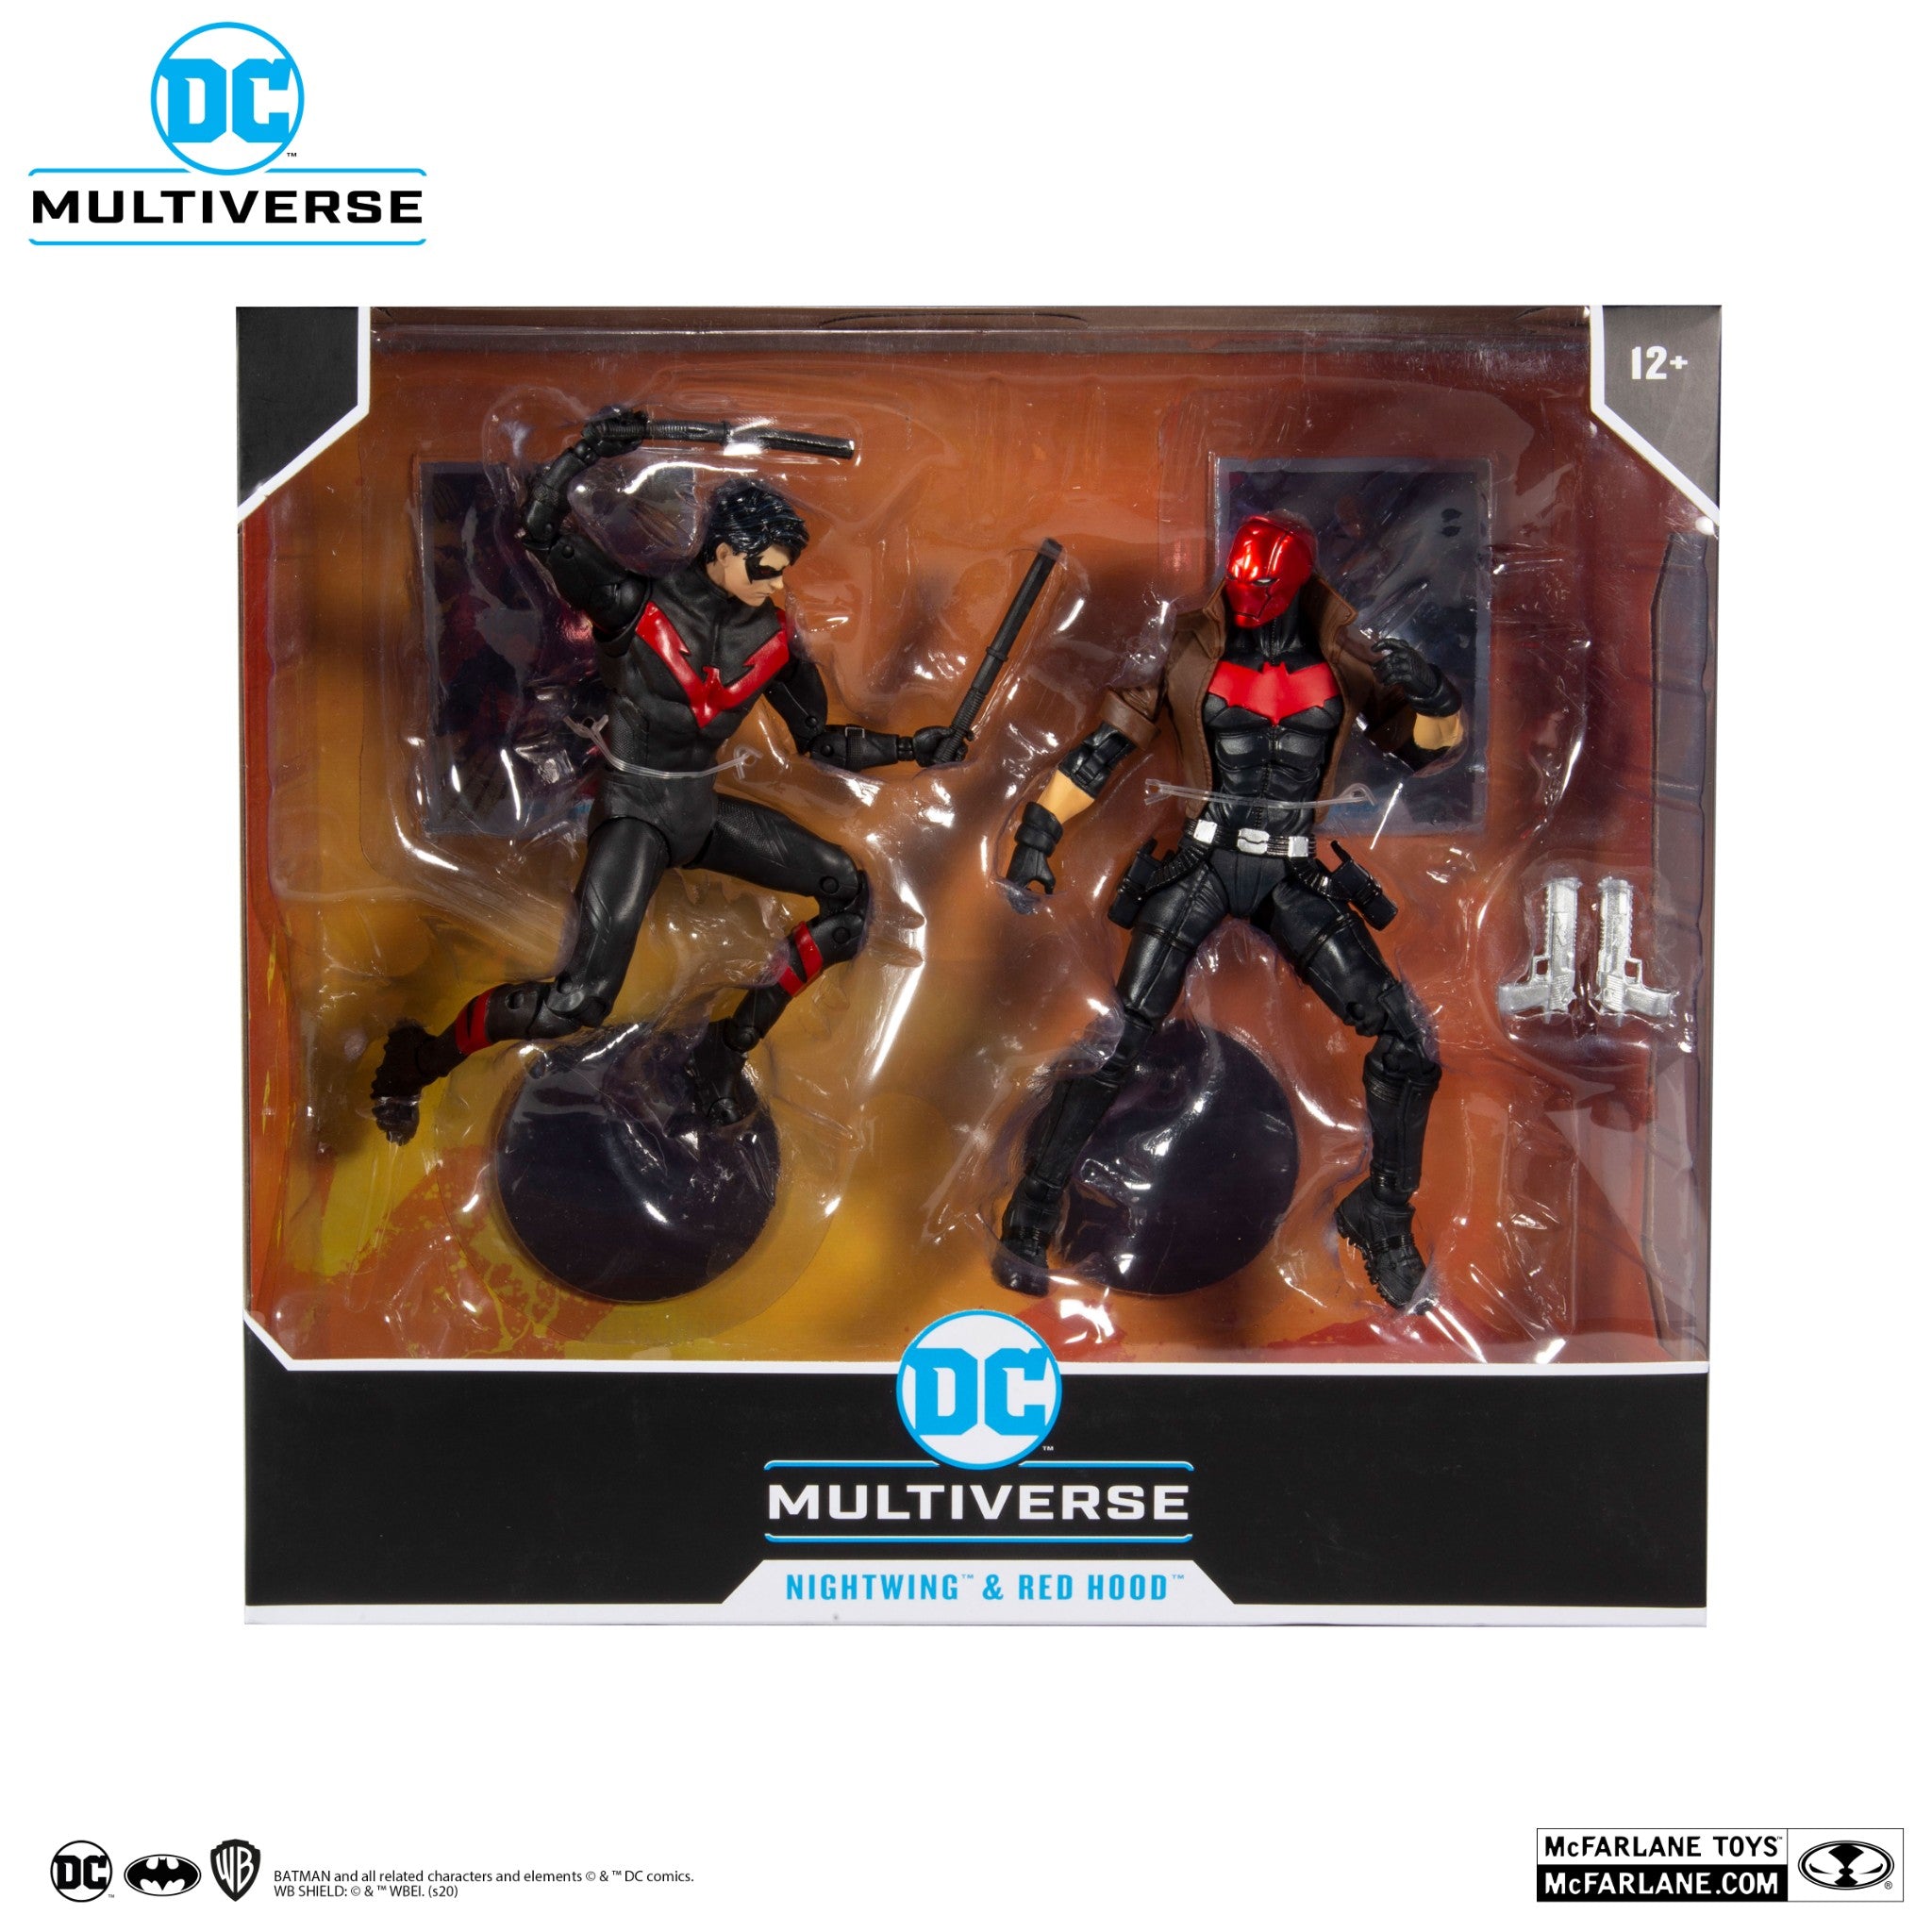 DC Multiverse Nightwing and Red Hood 2 pack - McFarlane Toys-1